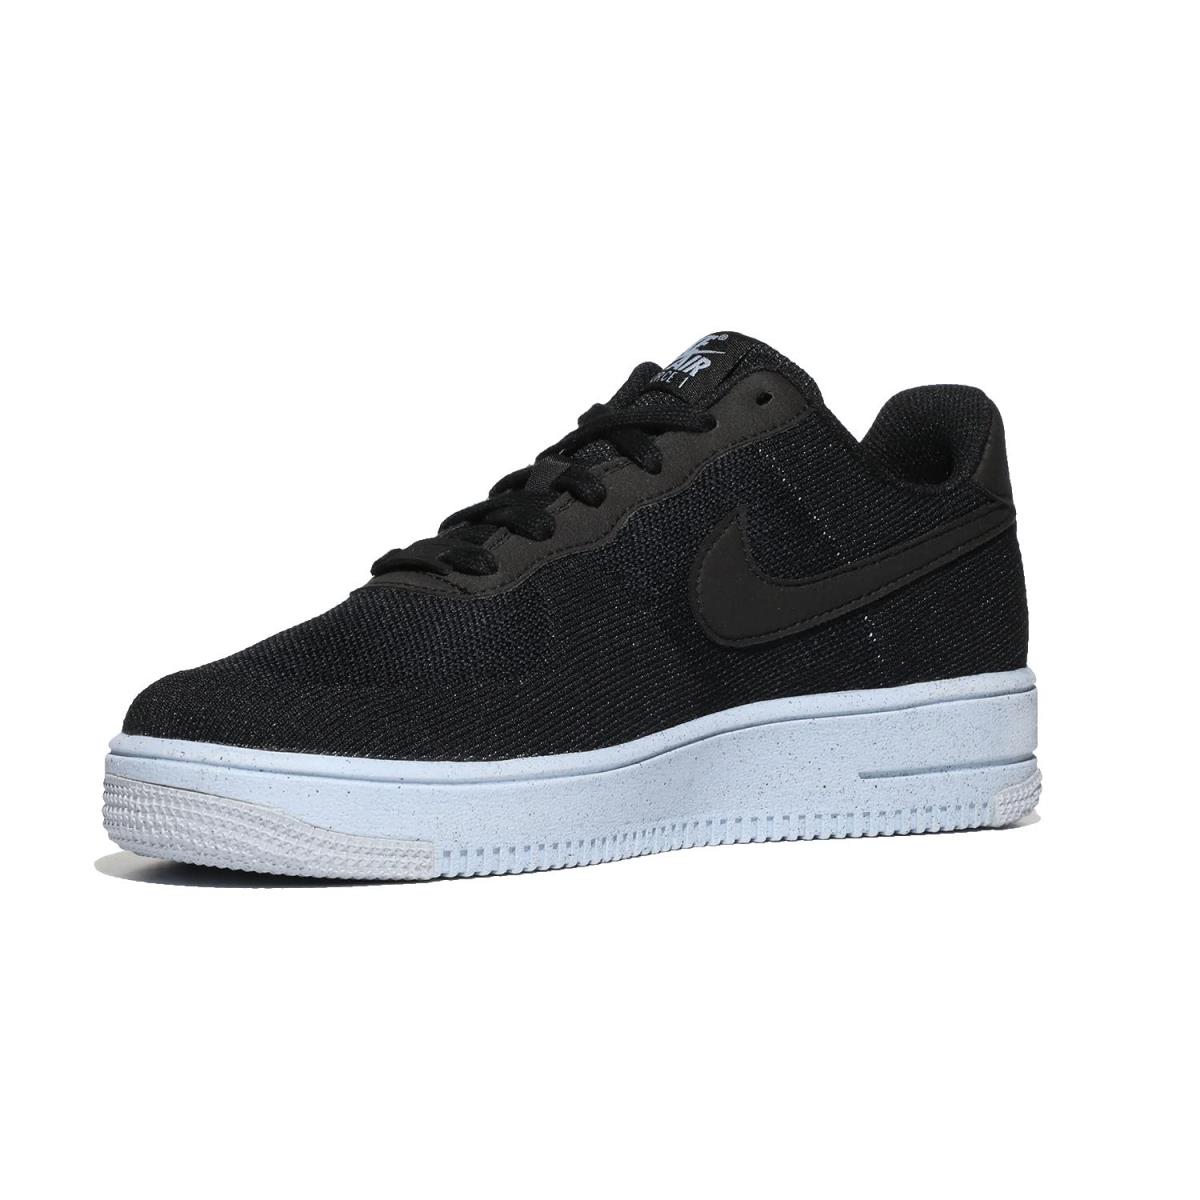 Boy`s Shoes Nike Kids Air Force 1 Crater Flyknit Big Kid Black/Black/Chambray Blue